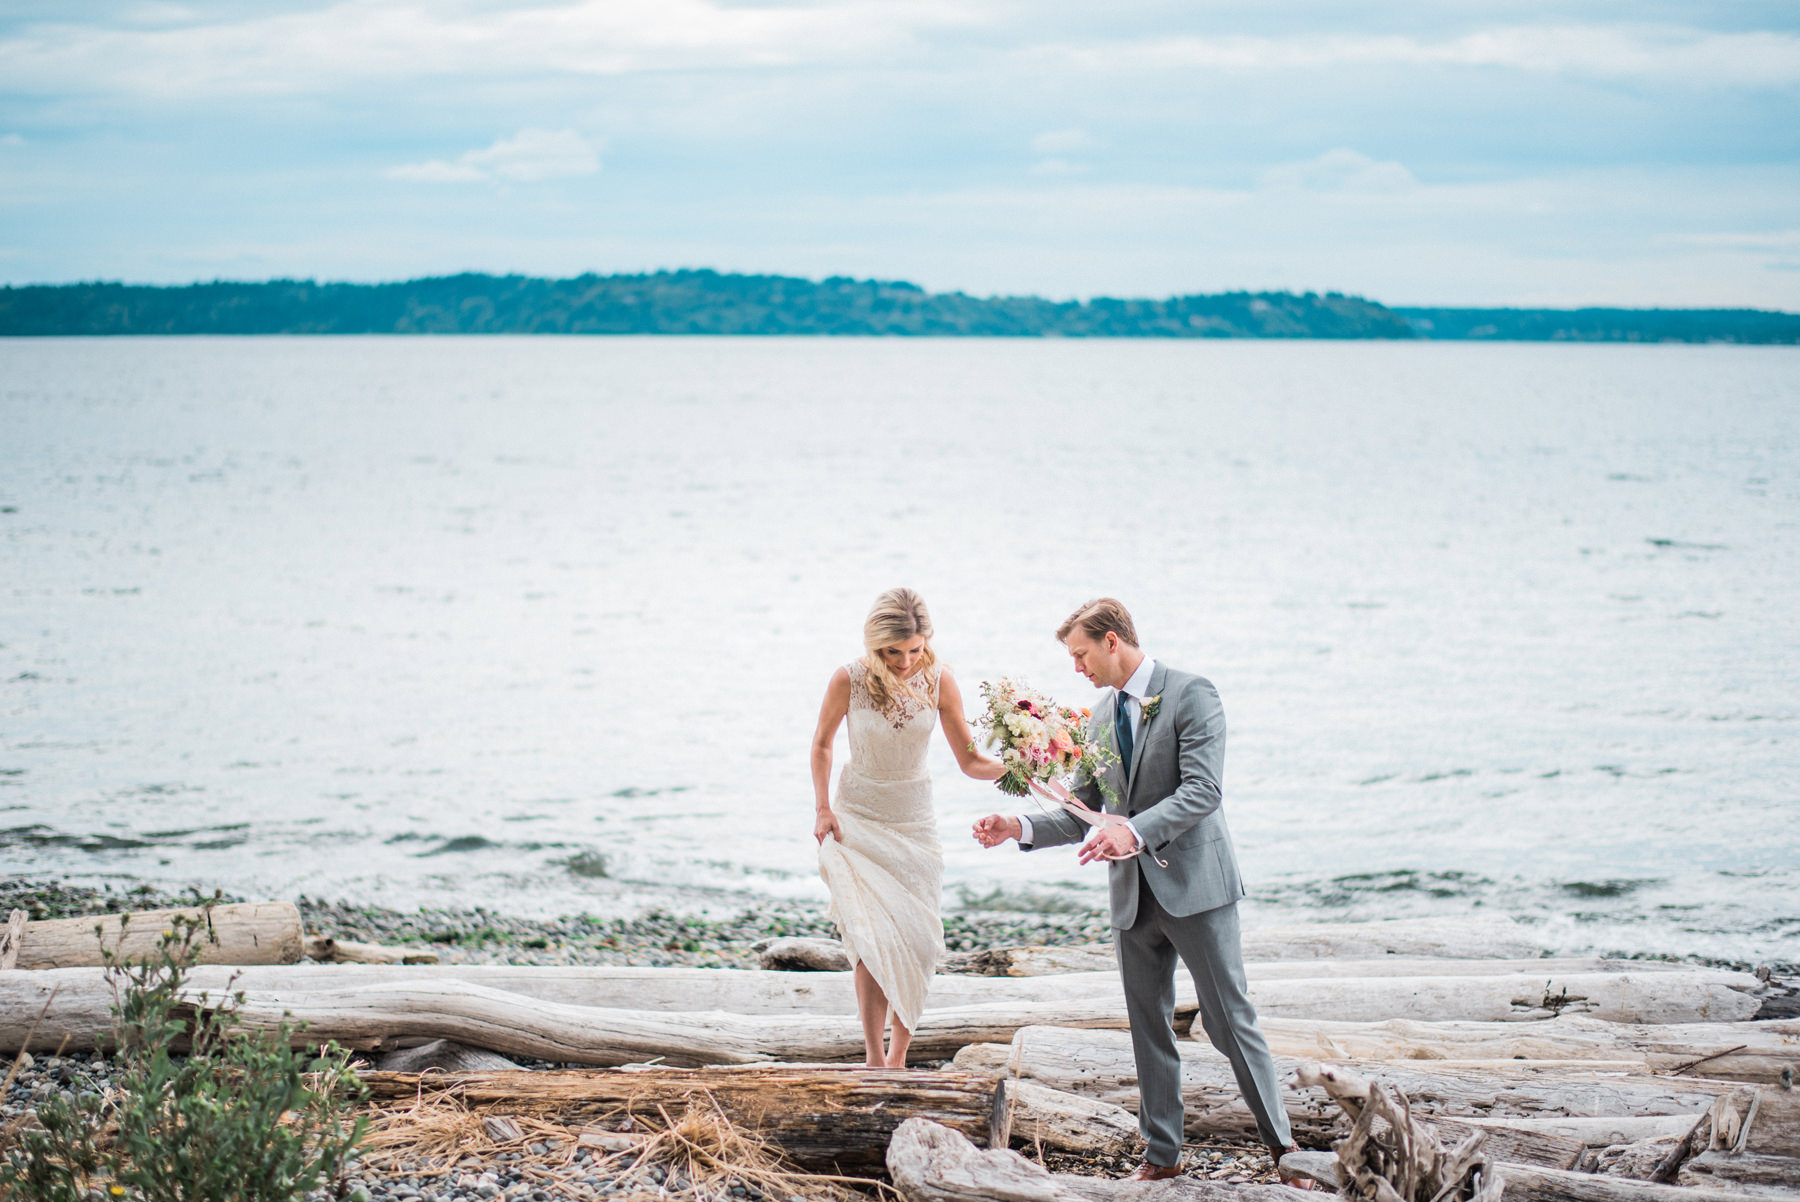 183-wedding-couple-walking-on-driftwood-holding-flowers-by-floret-floral.jpg